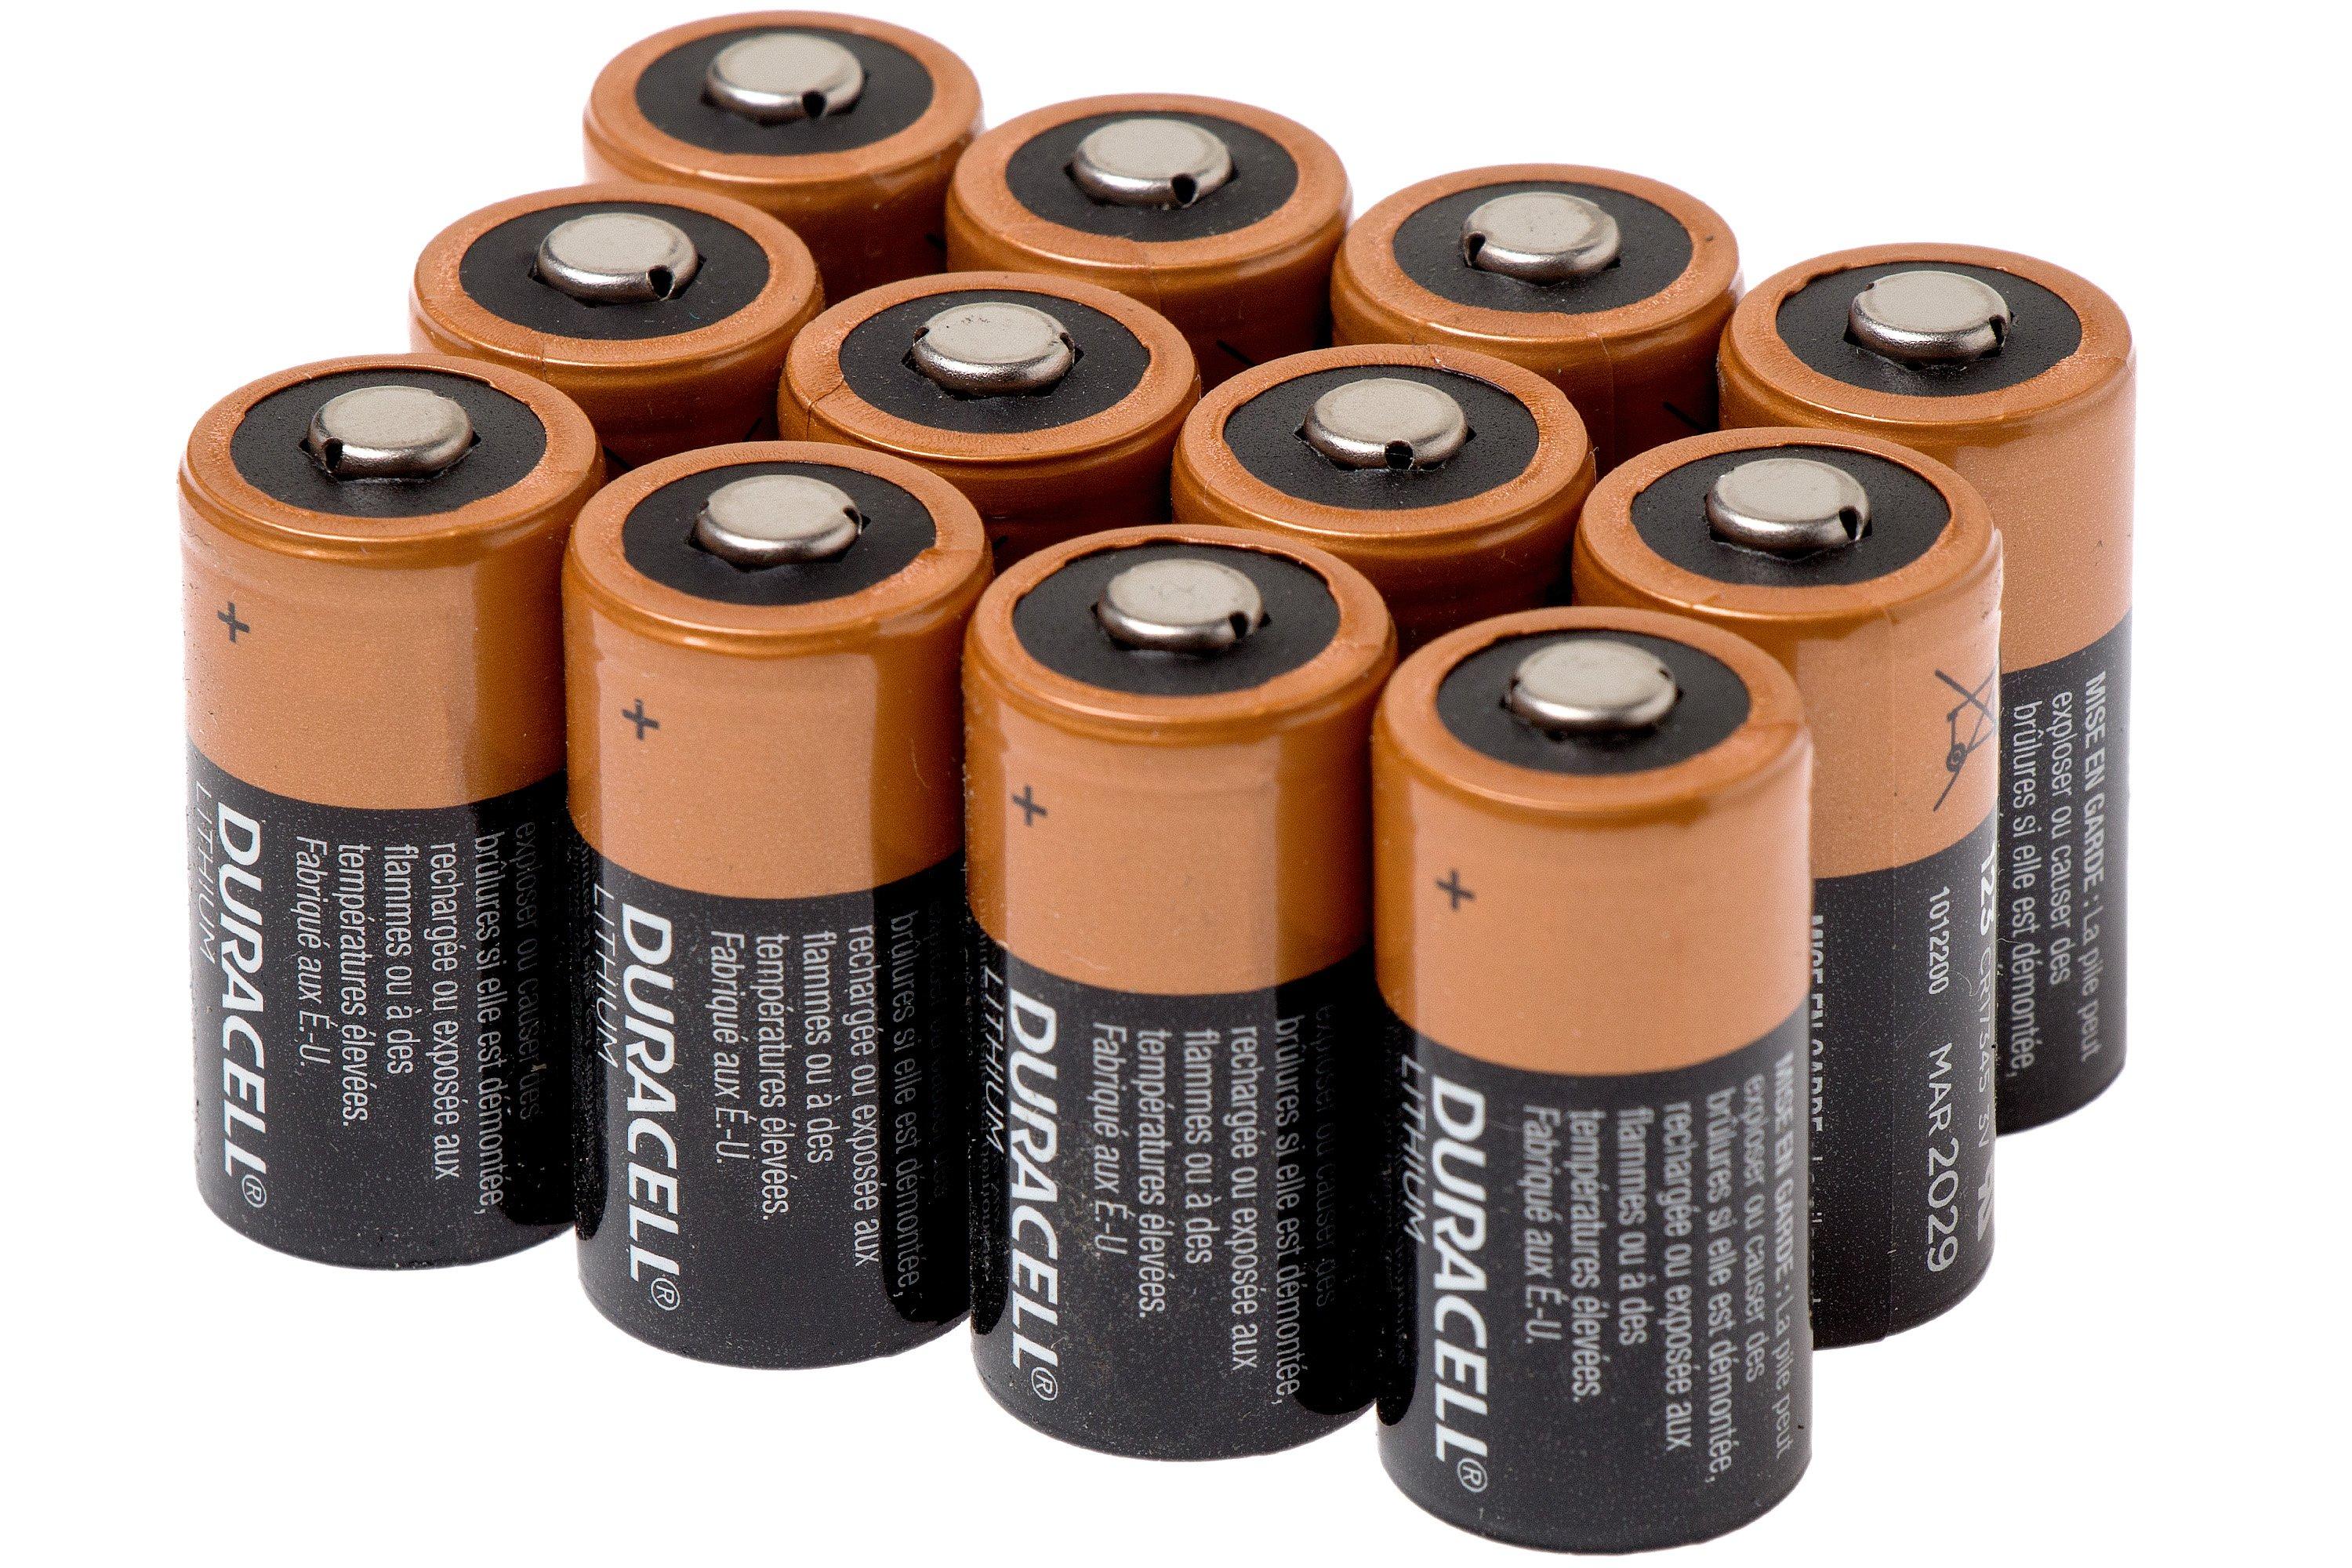 Armoedig Pluche pop melodie Duracell CR123A battery, set of 12 pcs. | Advantageously shopping at  Knivesandtools.com